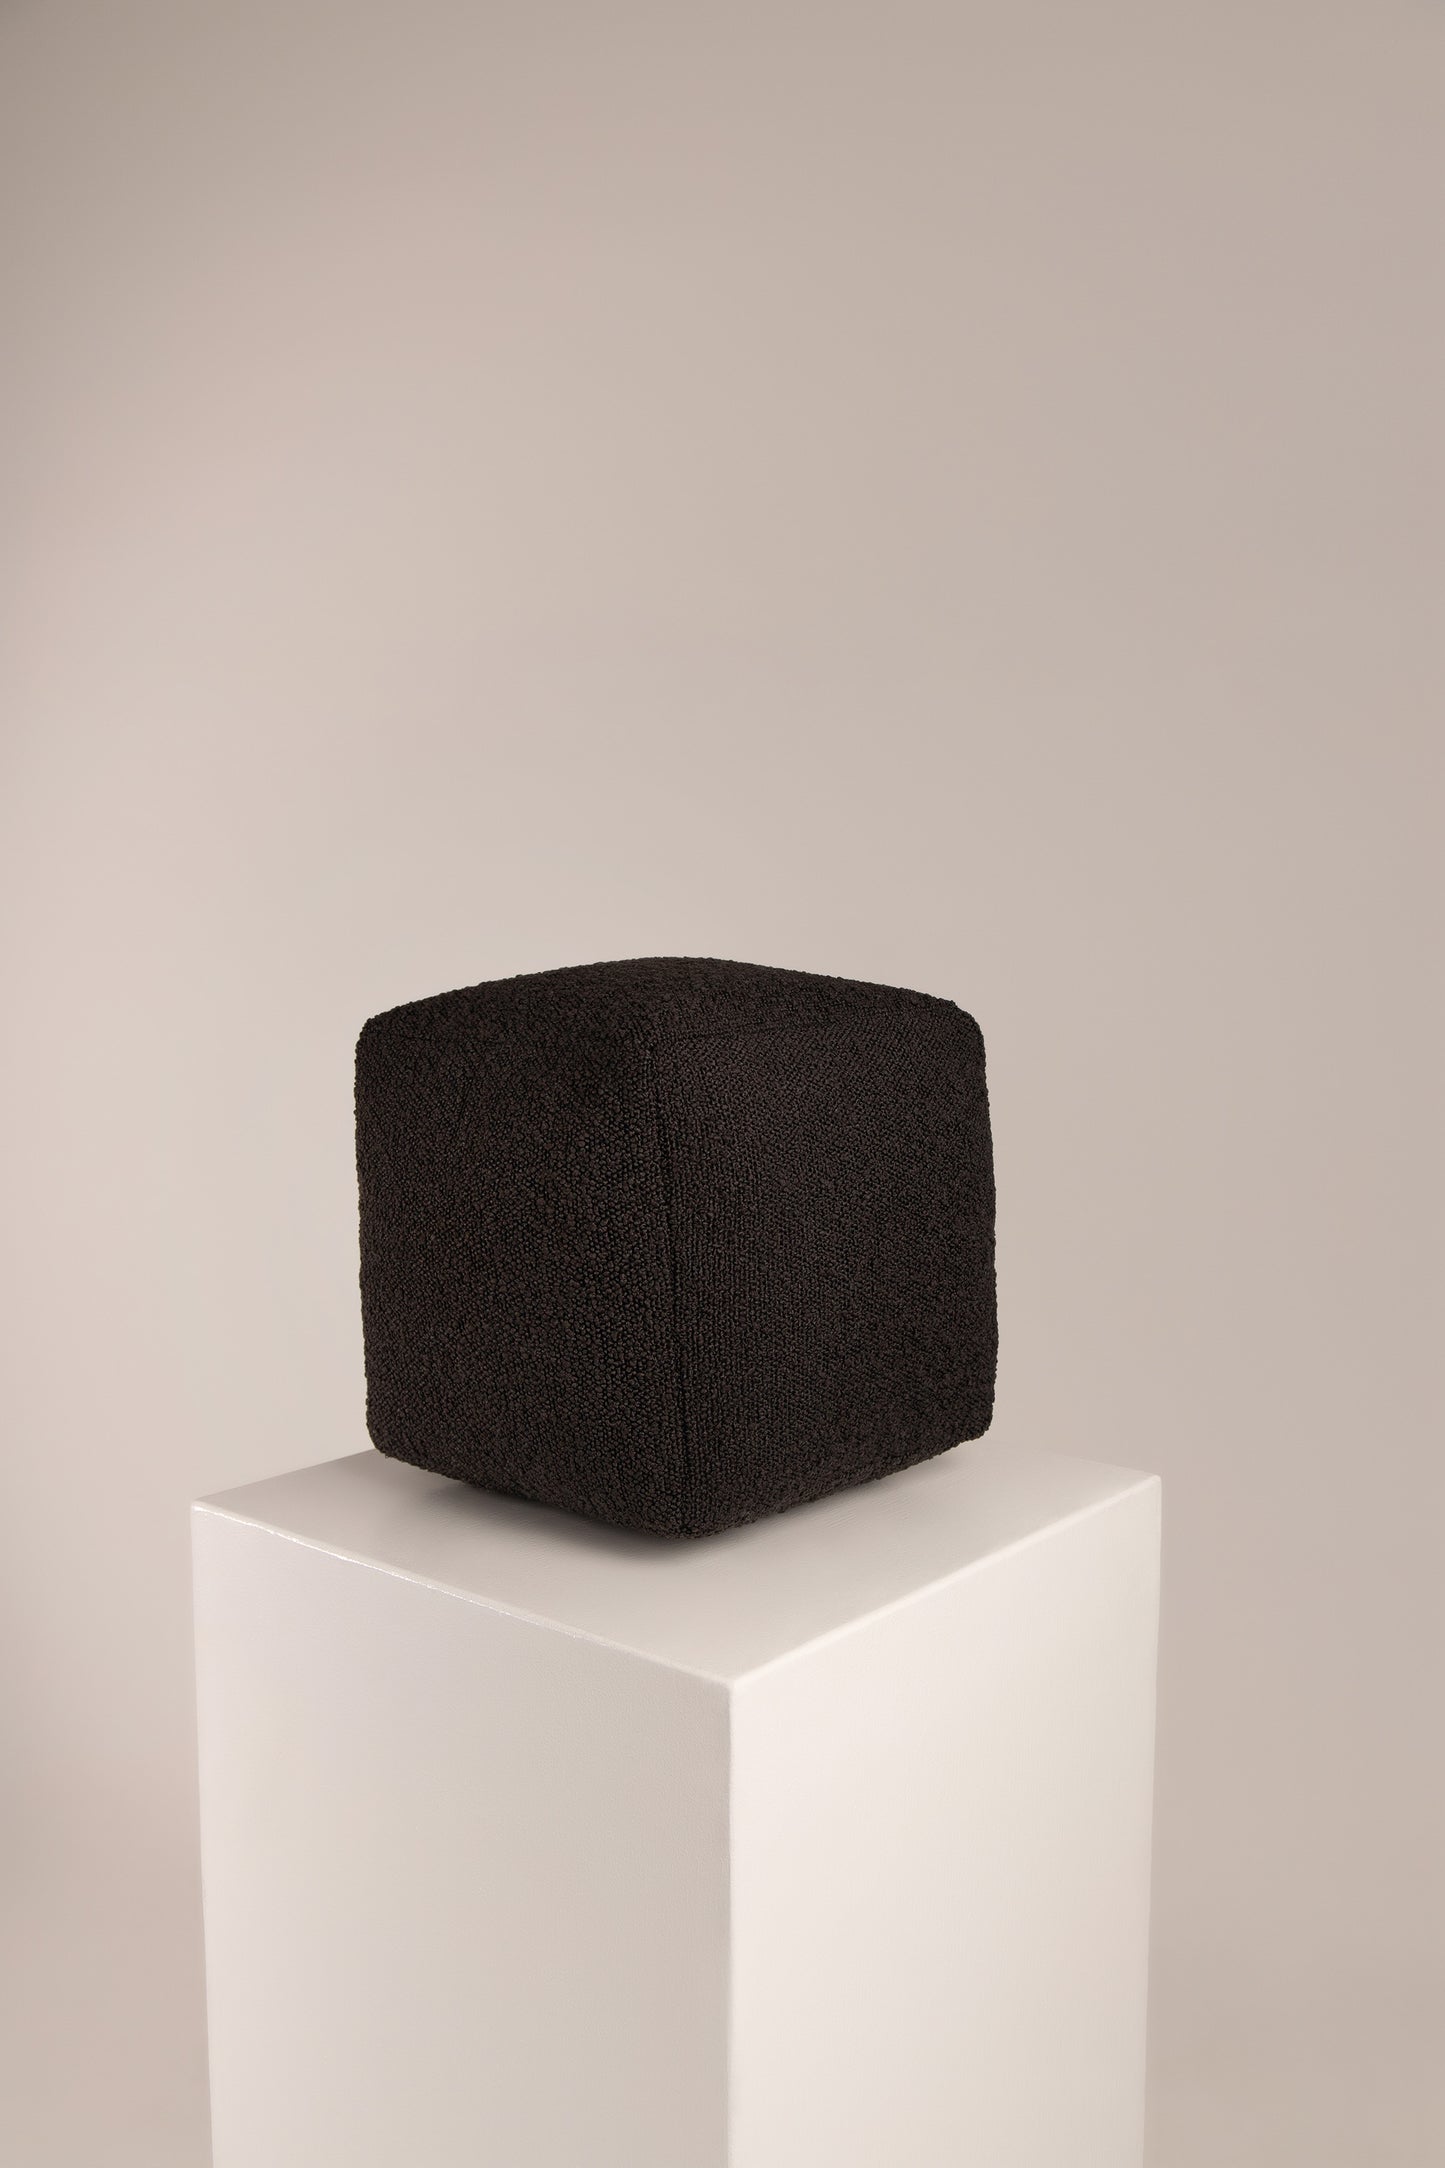 The CUBE scatter in black boucle